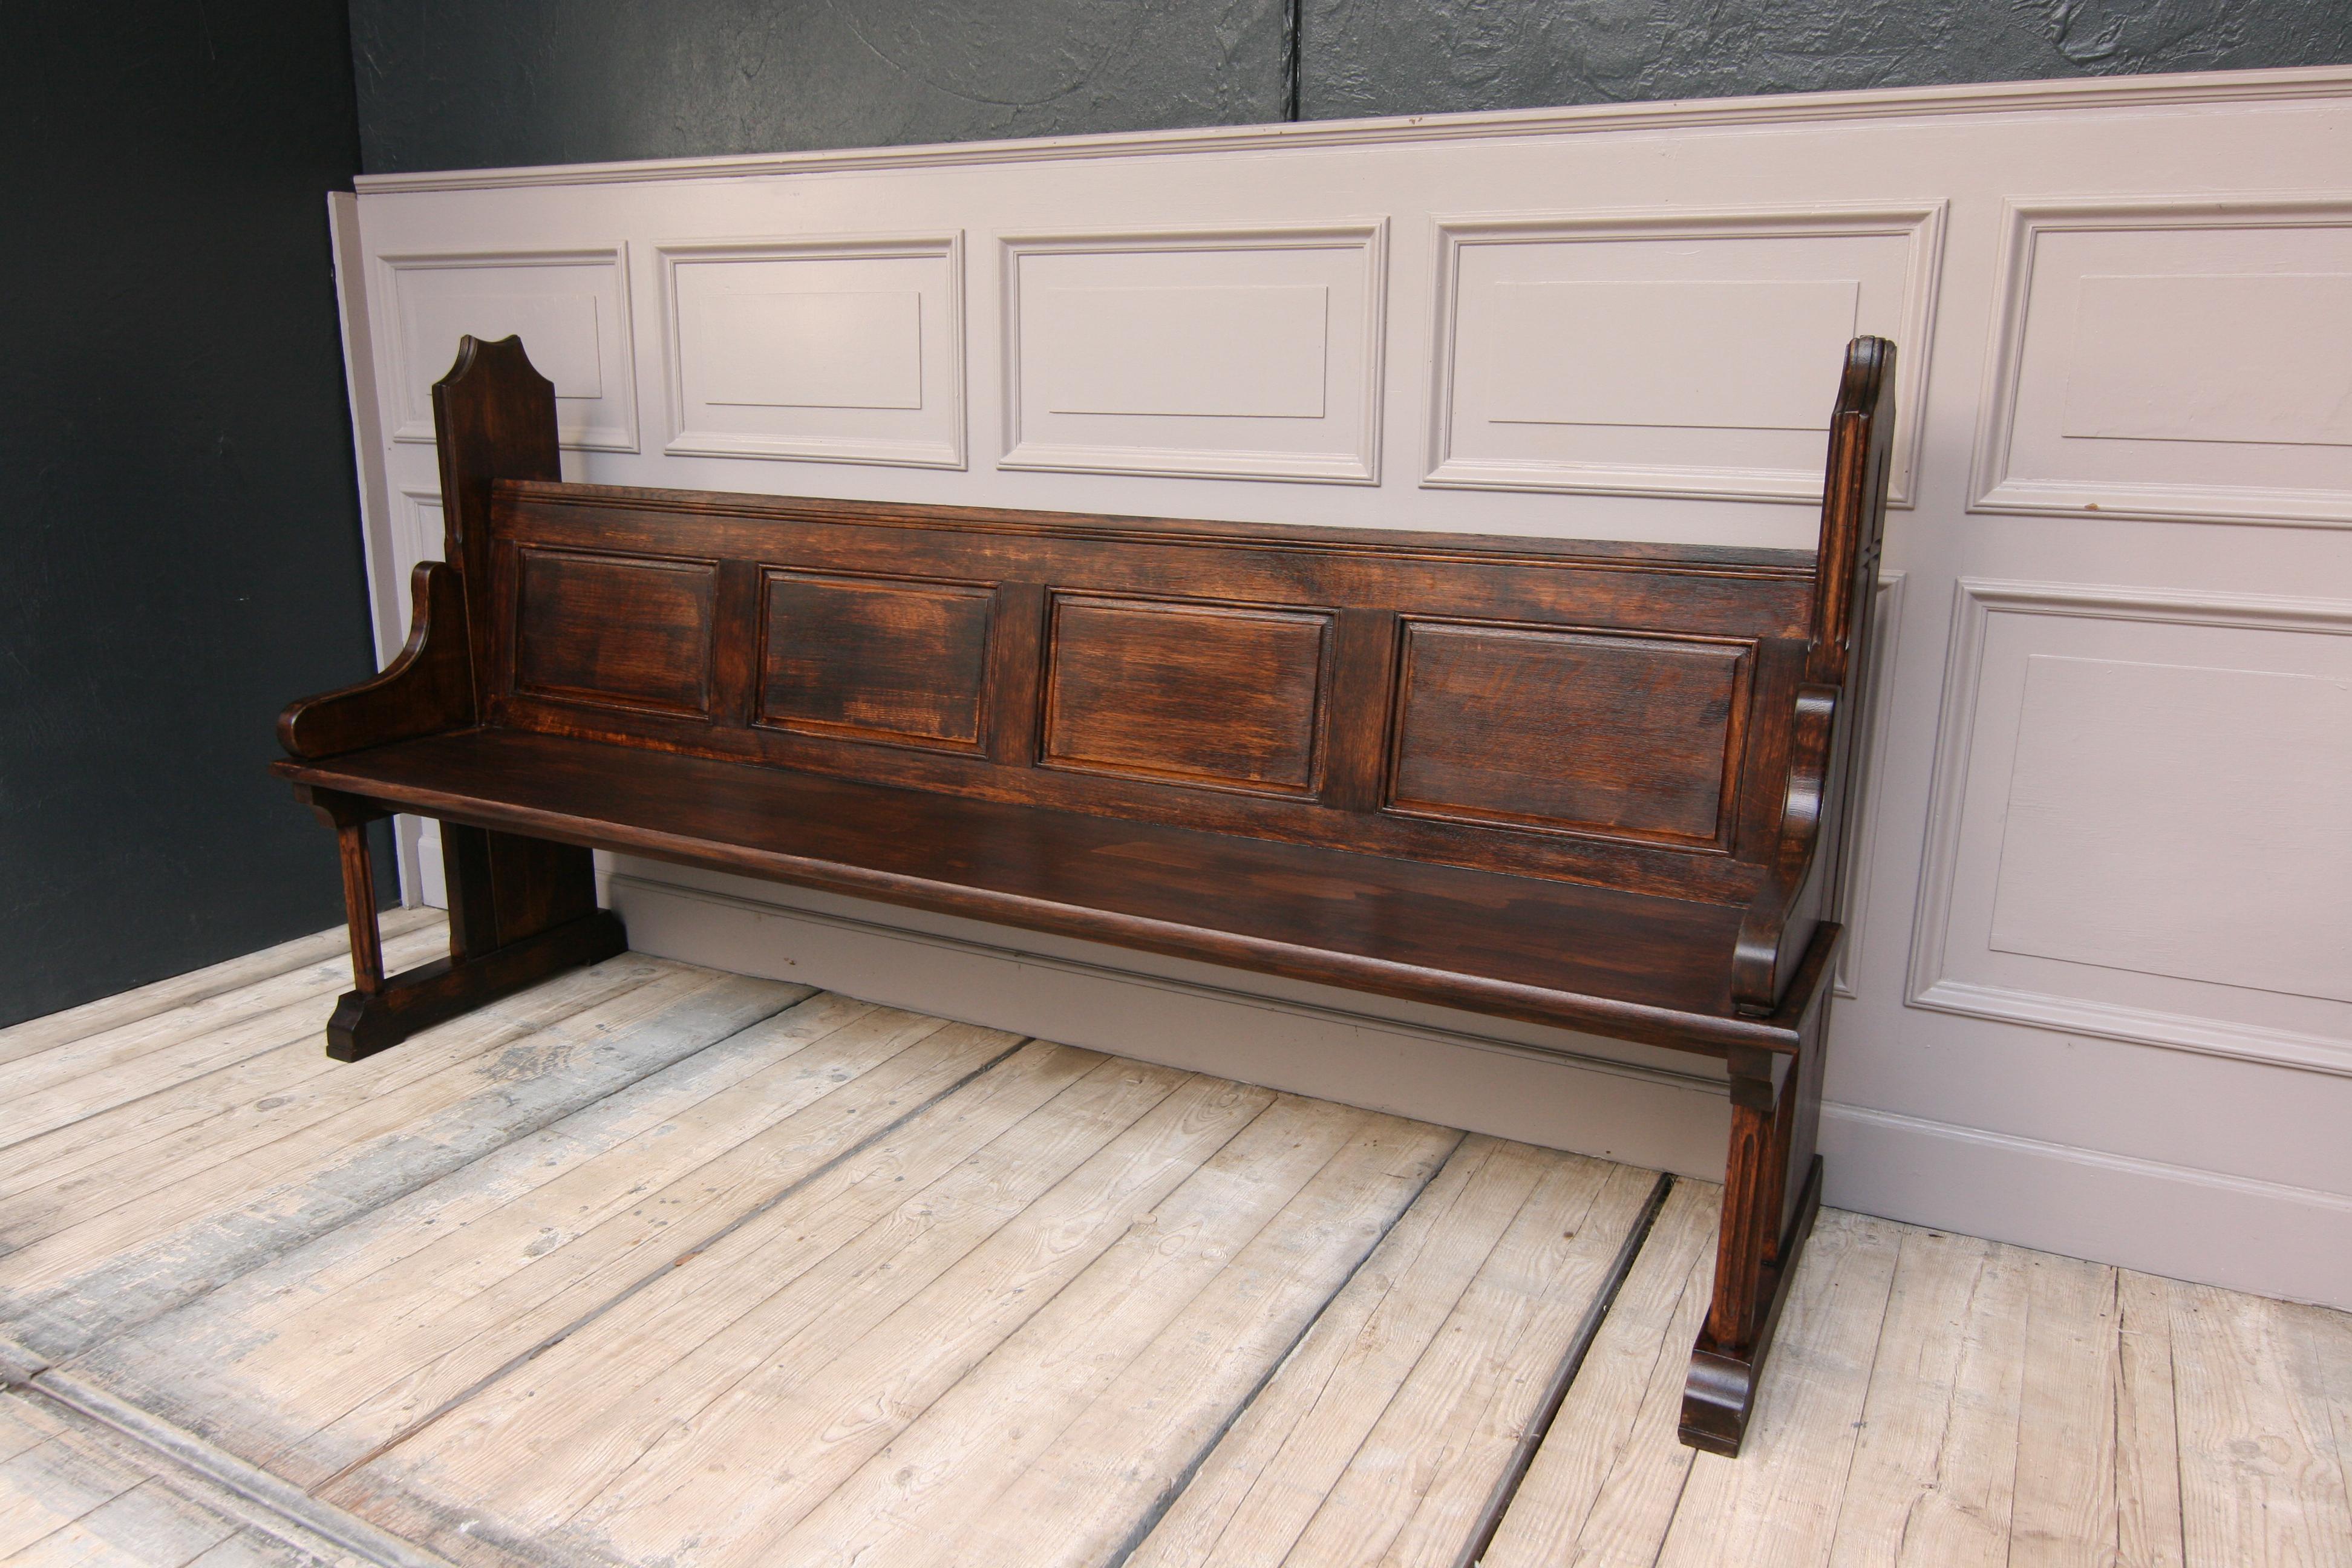 Large set of 15 (4-seat) church pews from the 